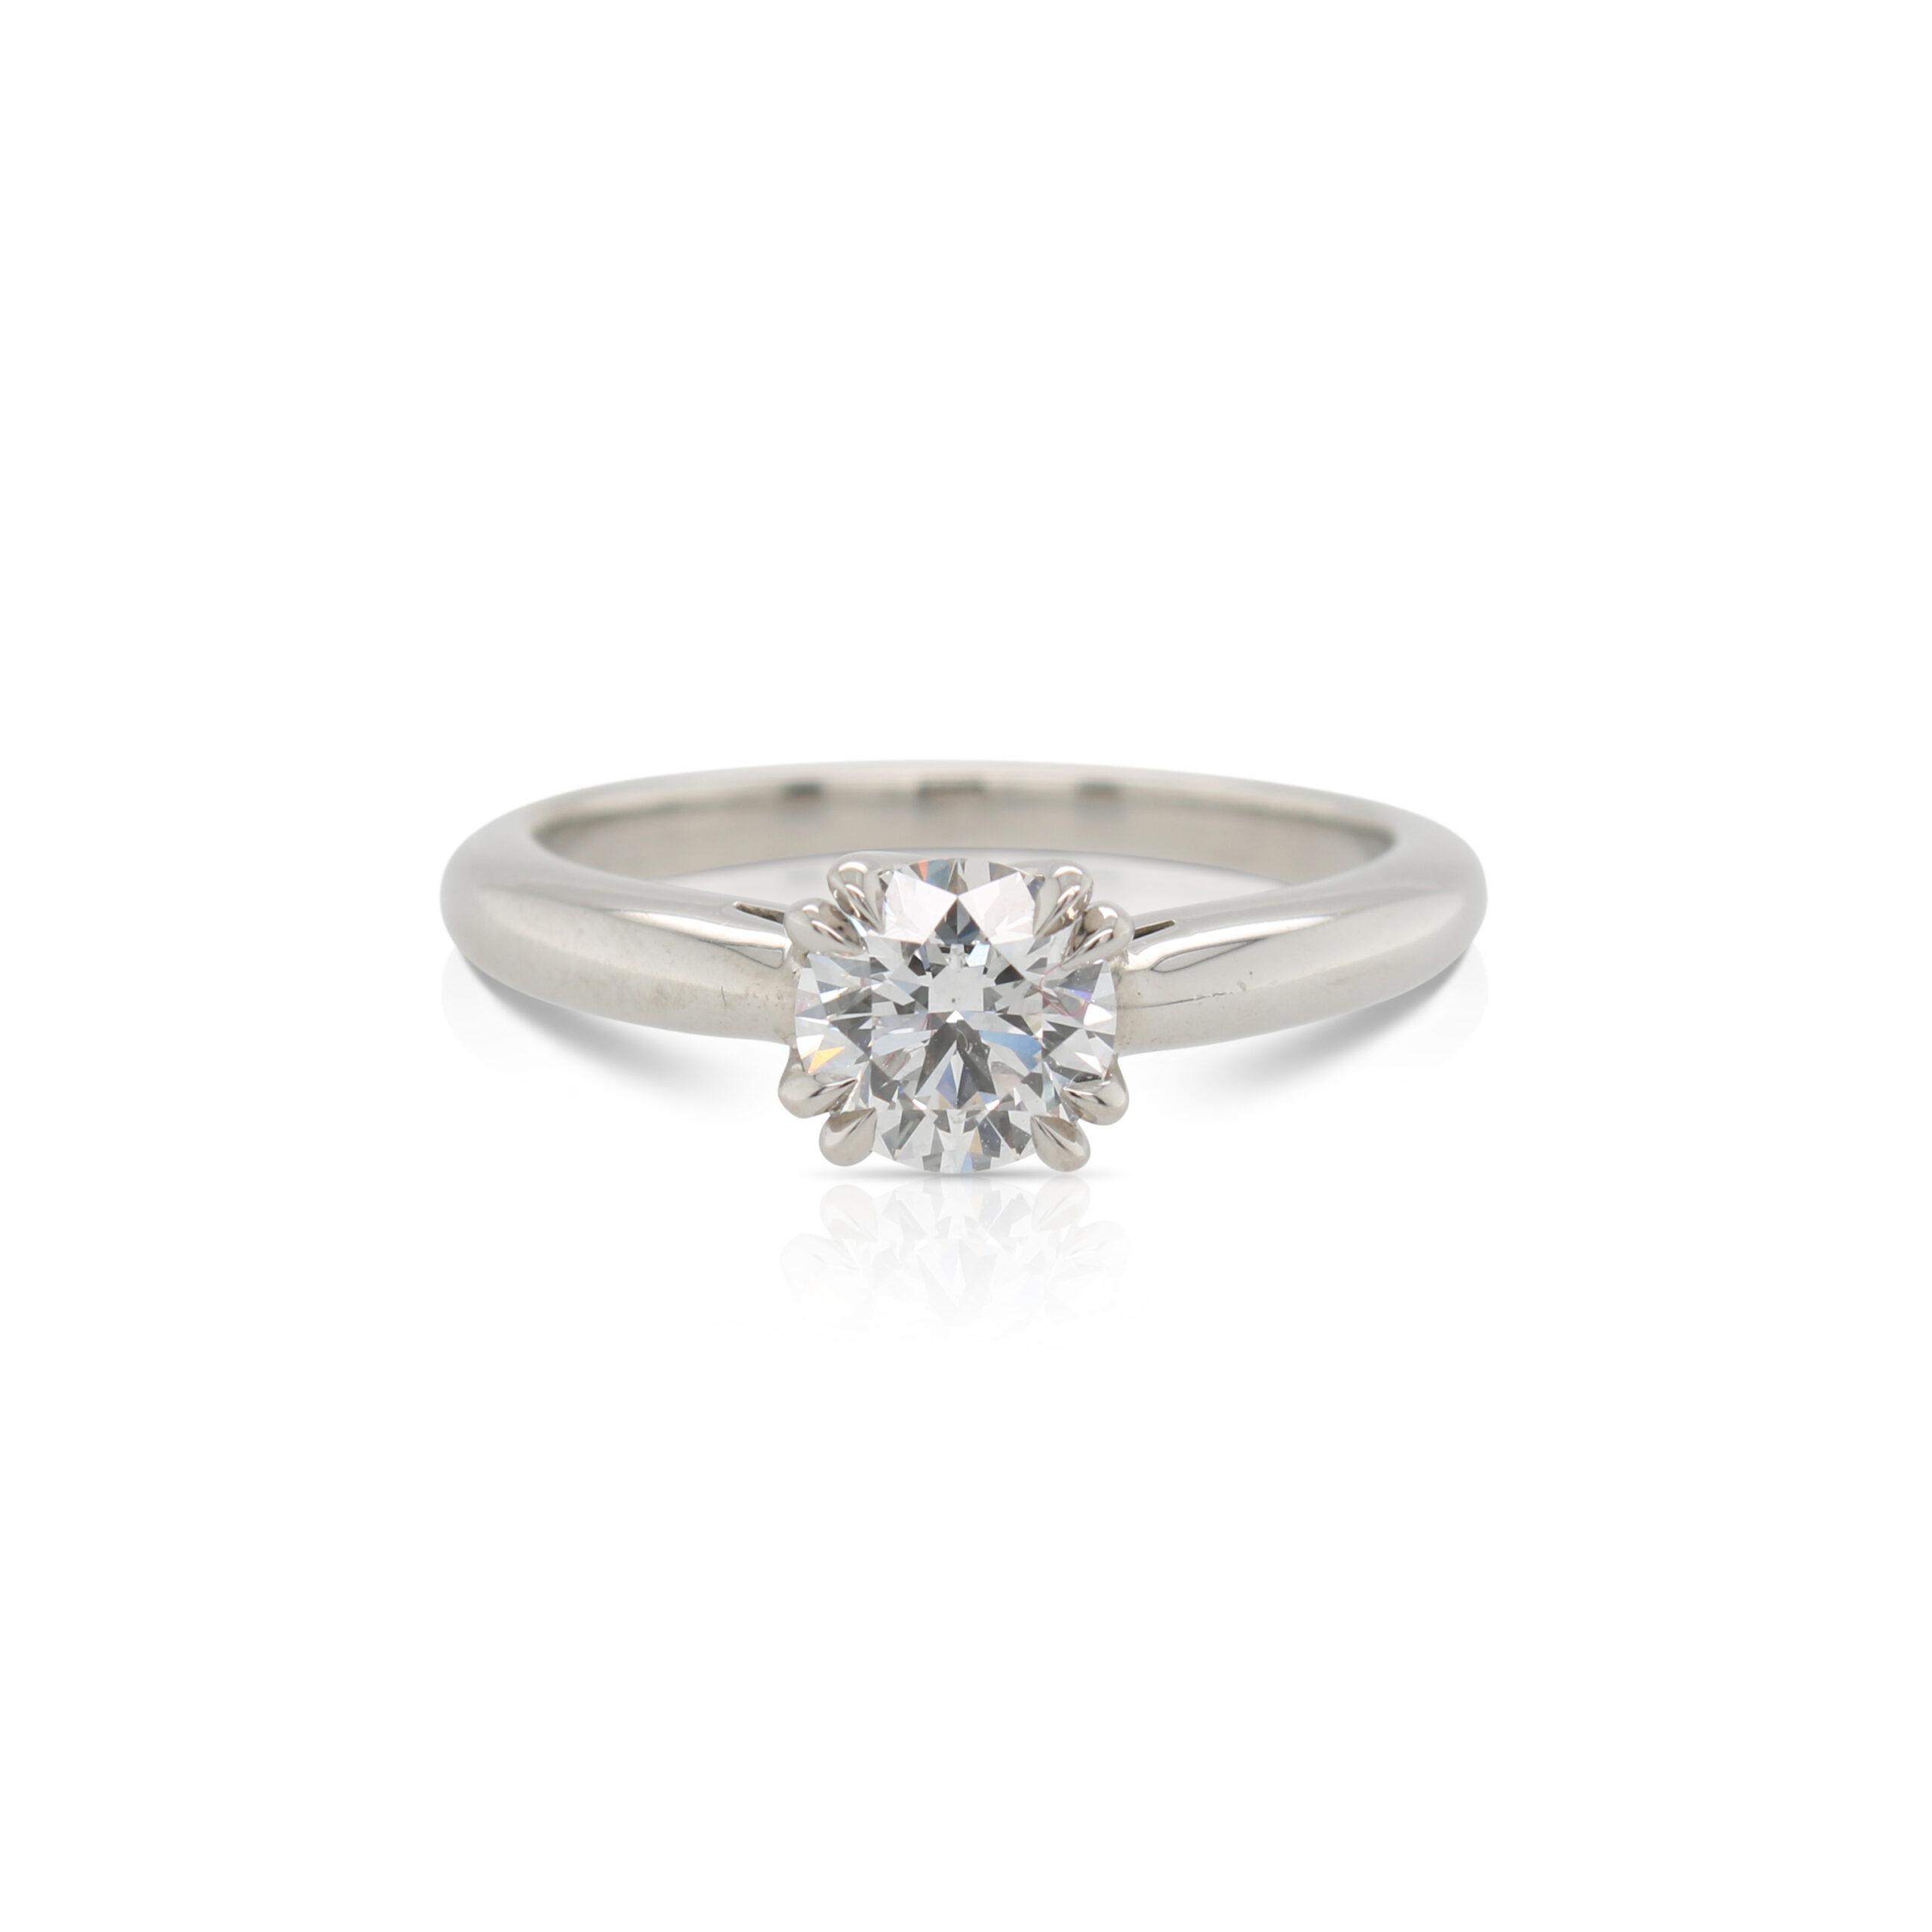 012266Solitaire-Engagement-Ring.jpg